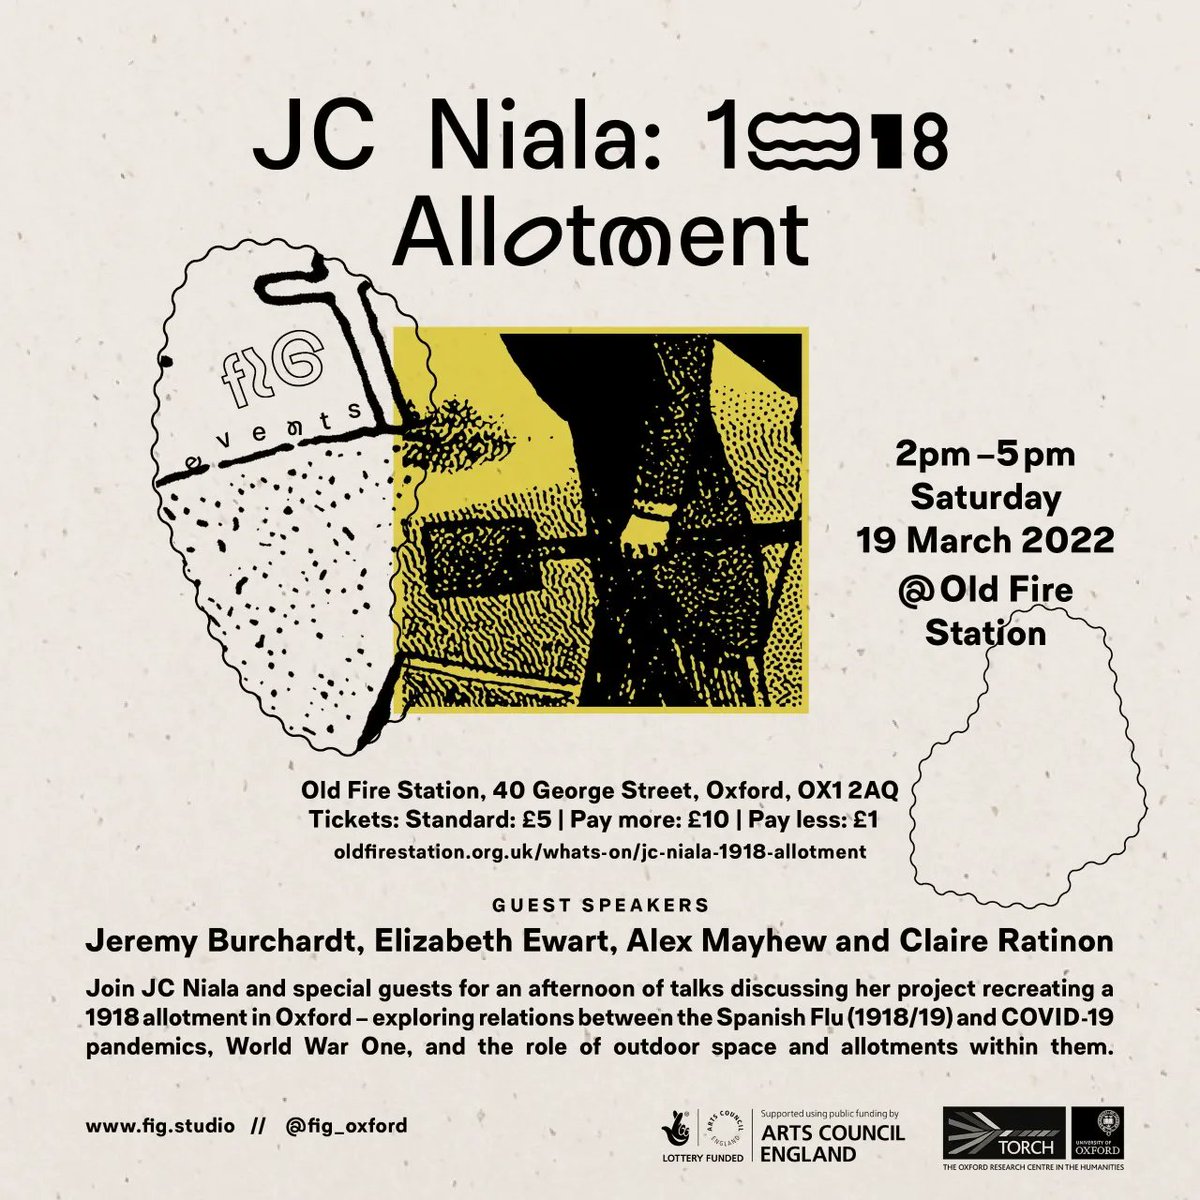 Join @jcniala and guests for a talk discussing her project recreating a 1918 allotment in Oxford: exploring relations between the Spanish Flu  and COVID-19 pandemics, World War One, and the role of outdoor space and allotments within the🌱 @Fig_Oxford 

buff.ly/35zO2Jr